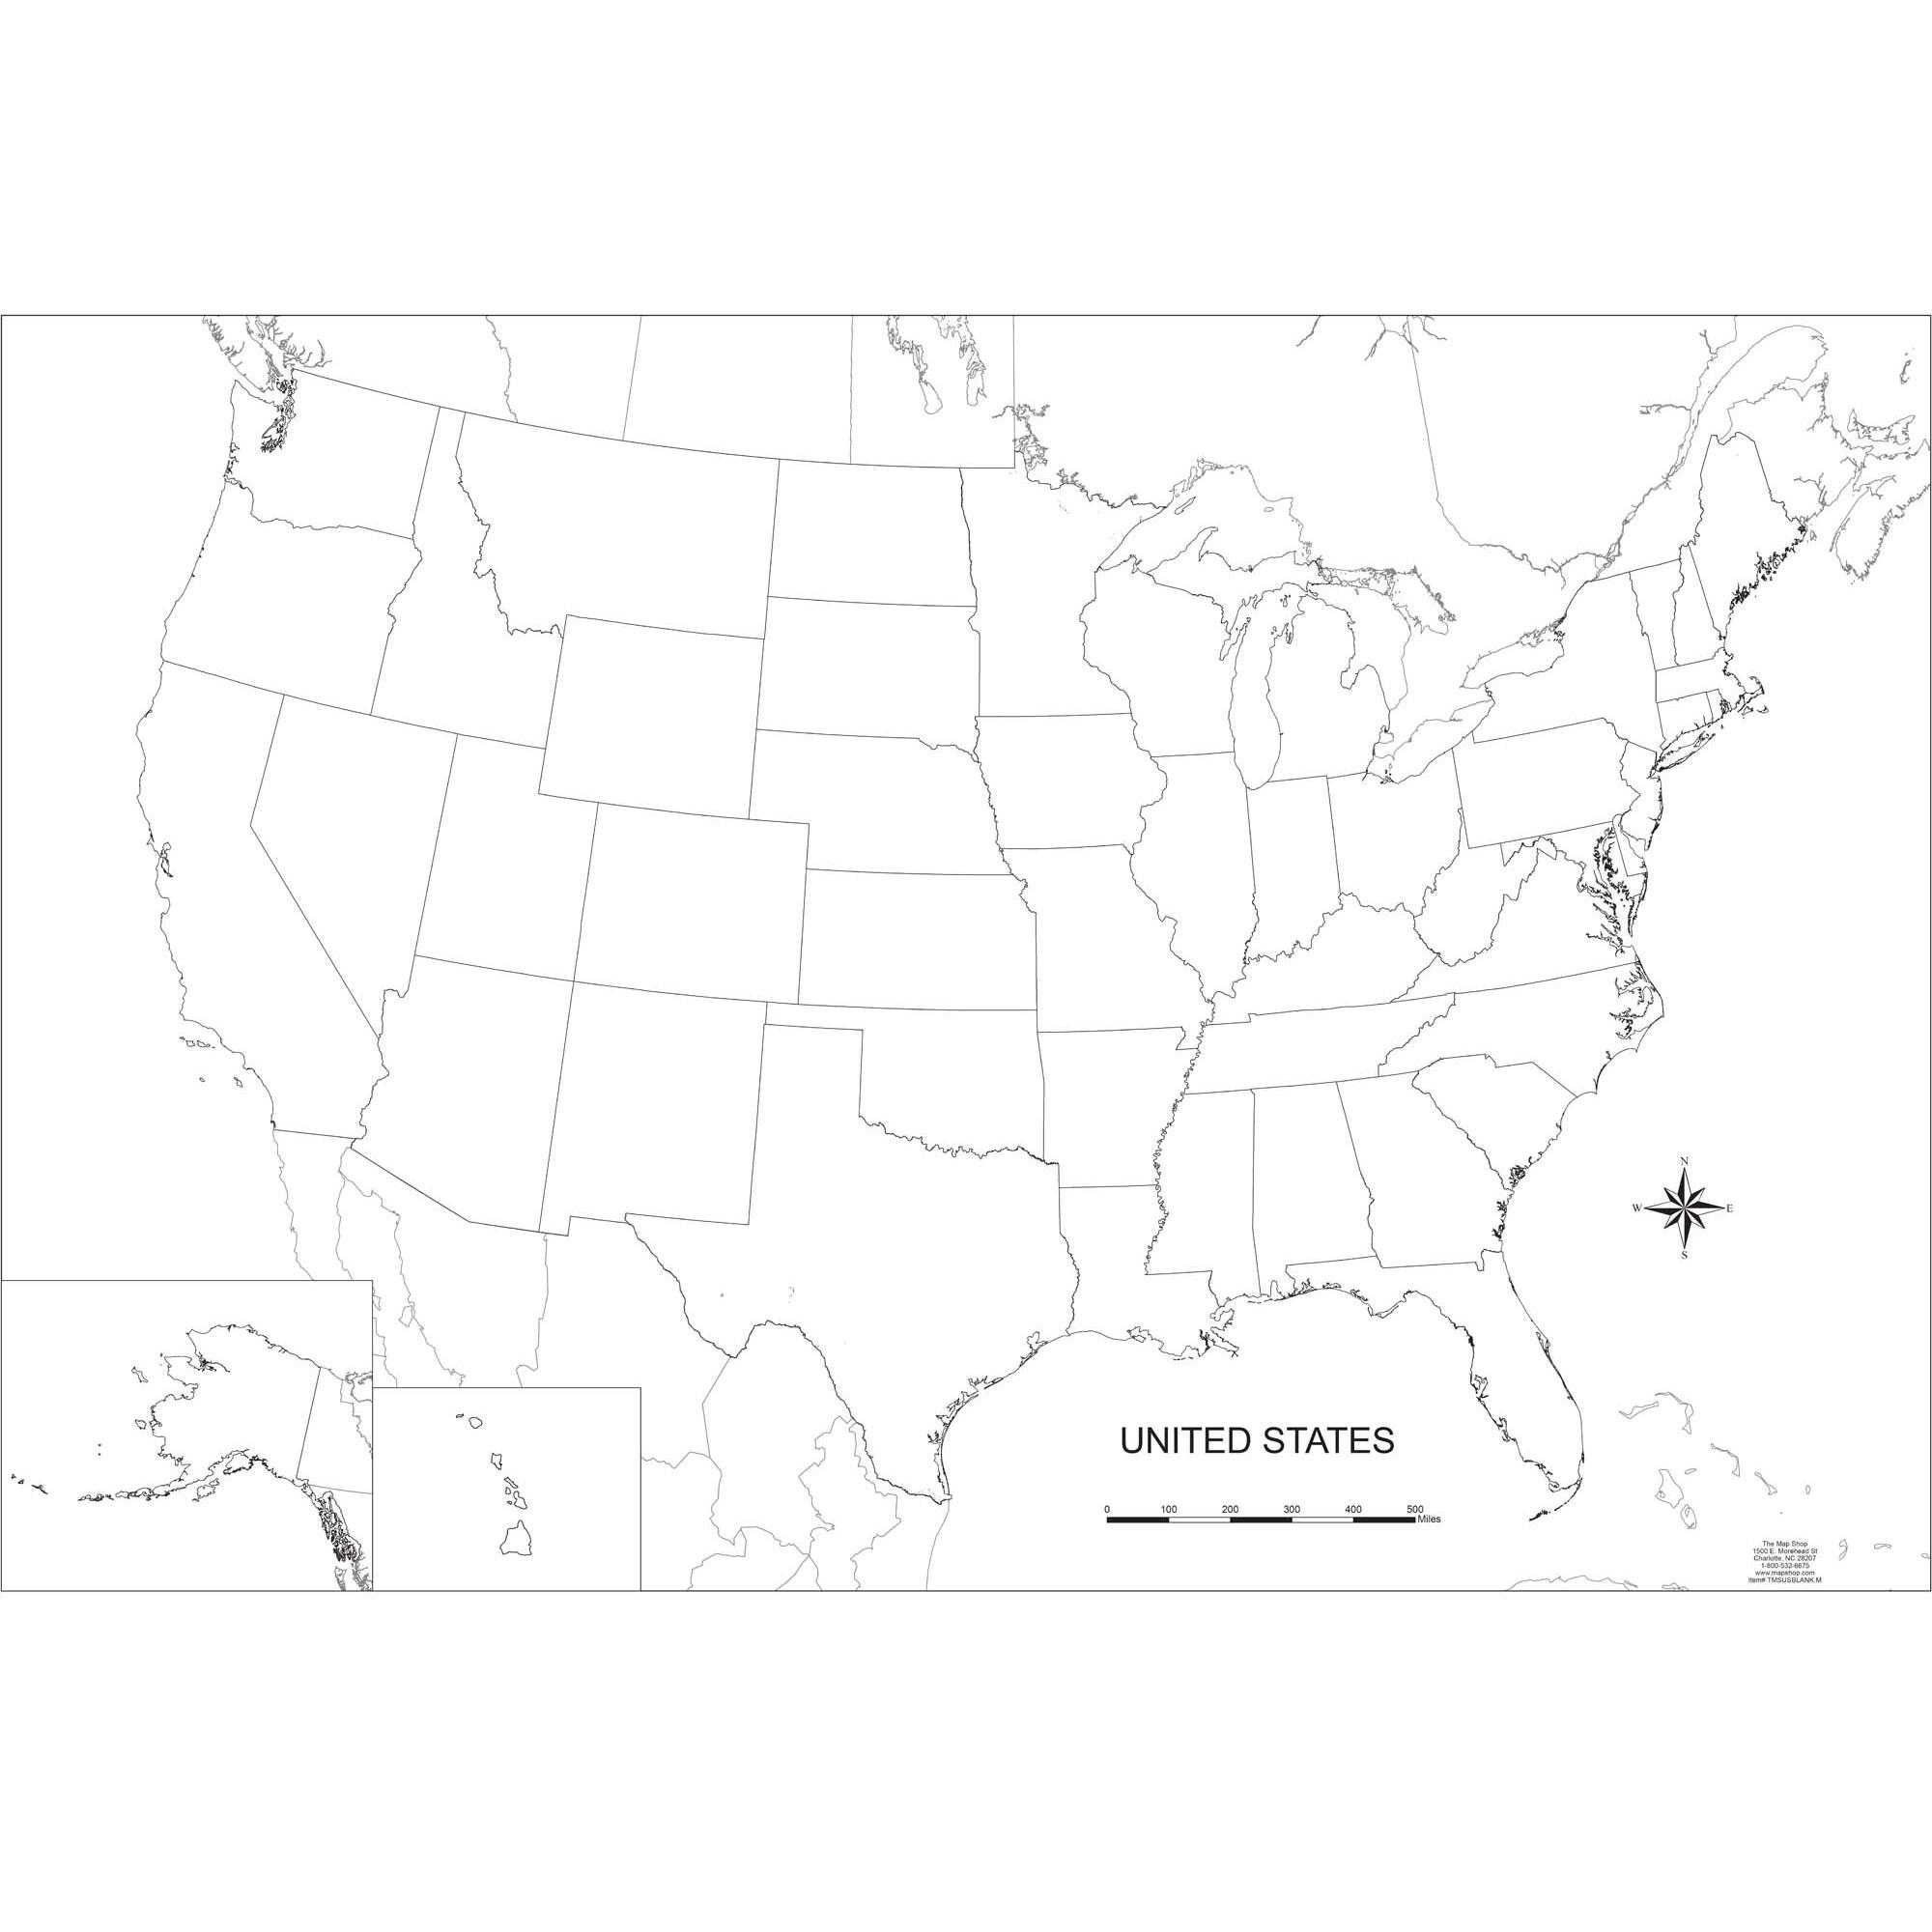 Blank United States Outline Wall Map Regarding United States Map Template Blank